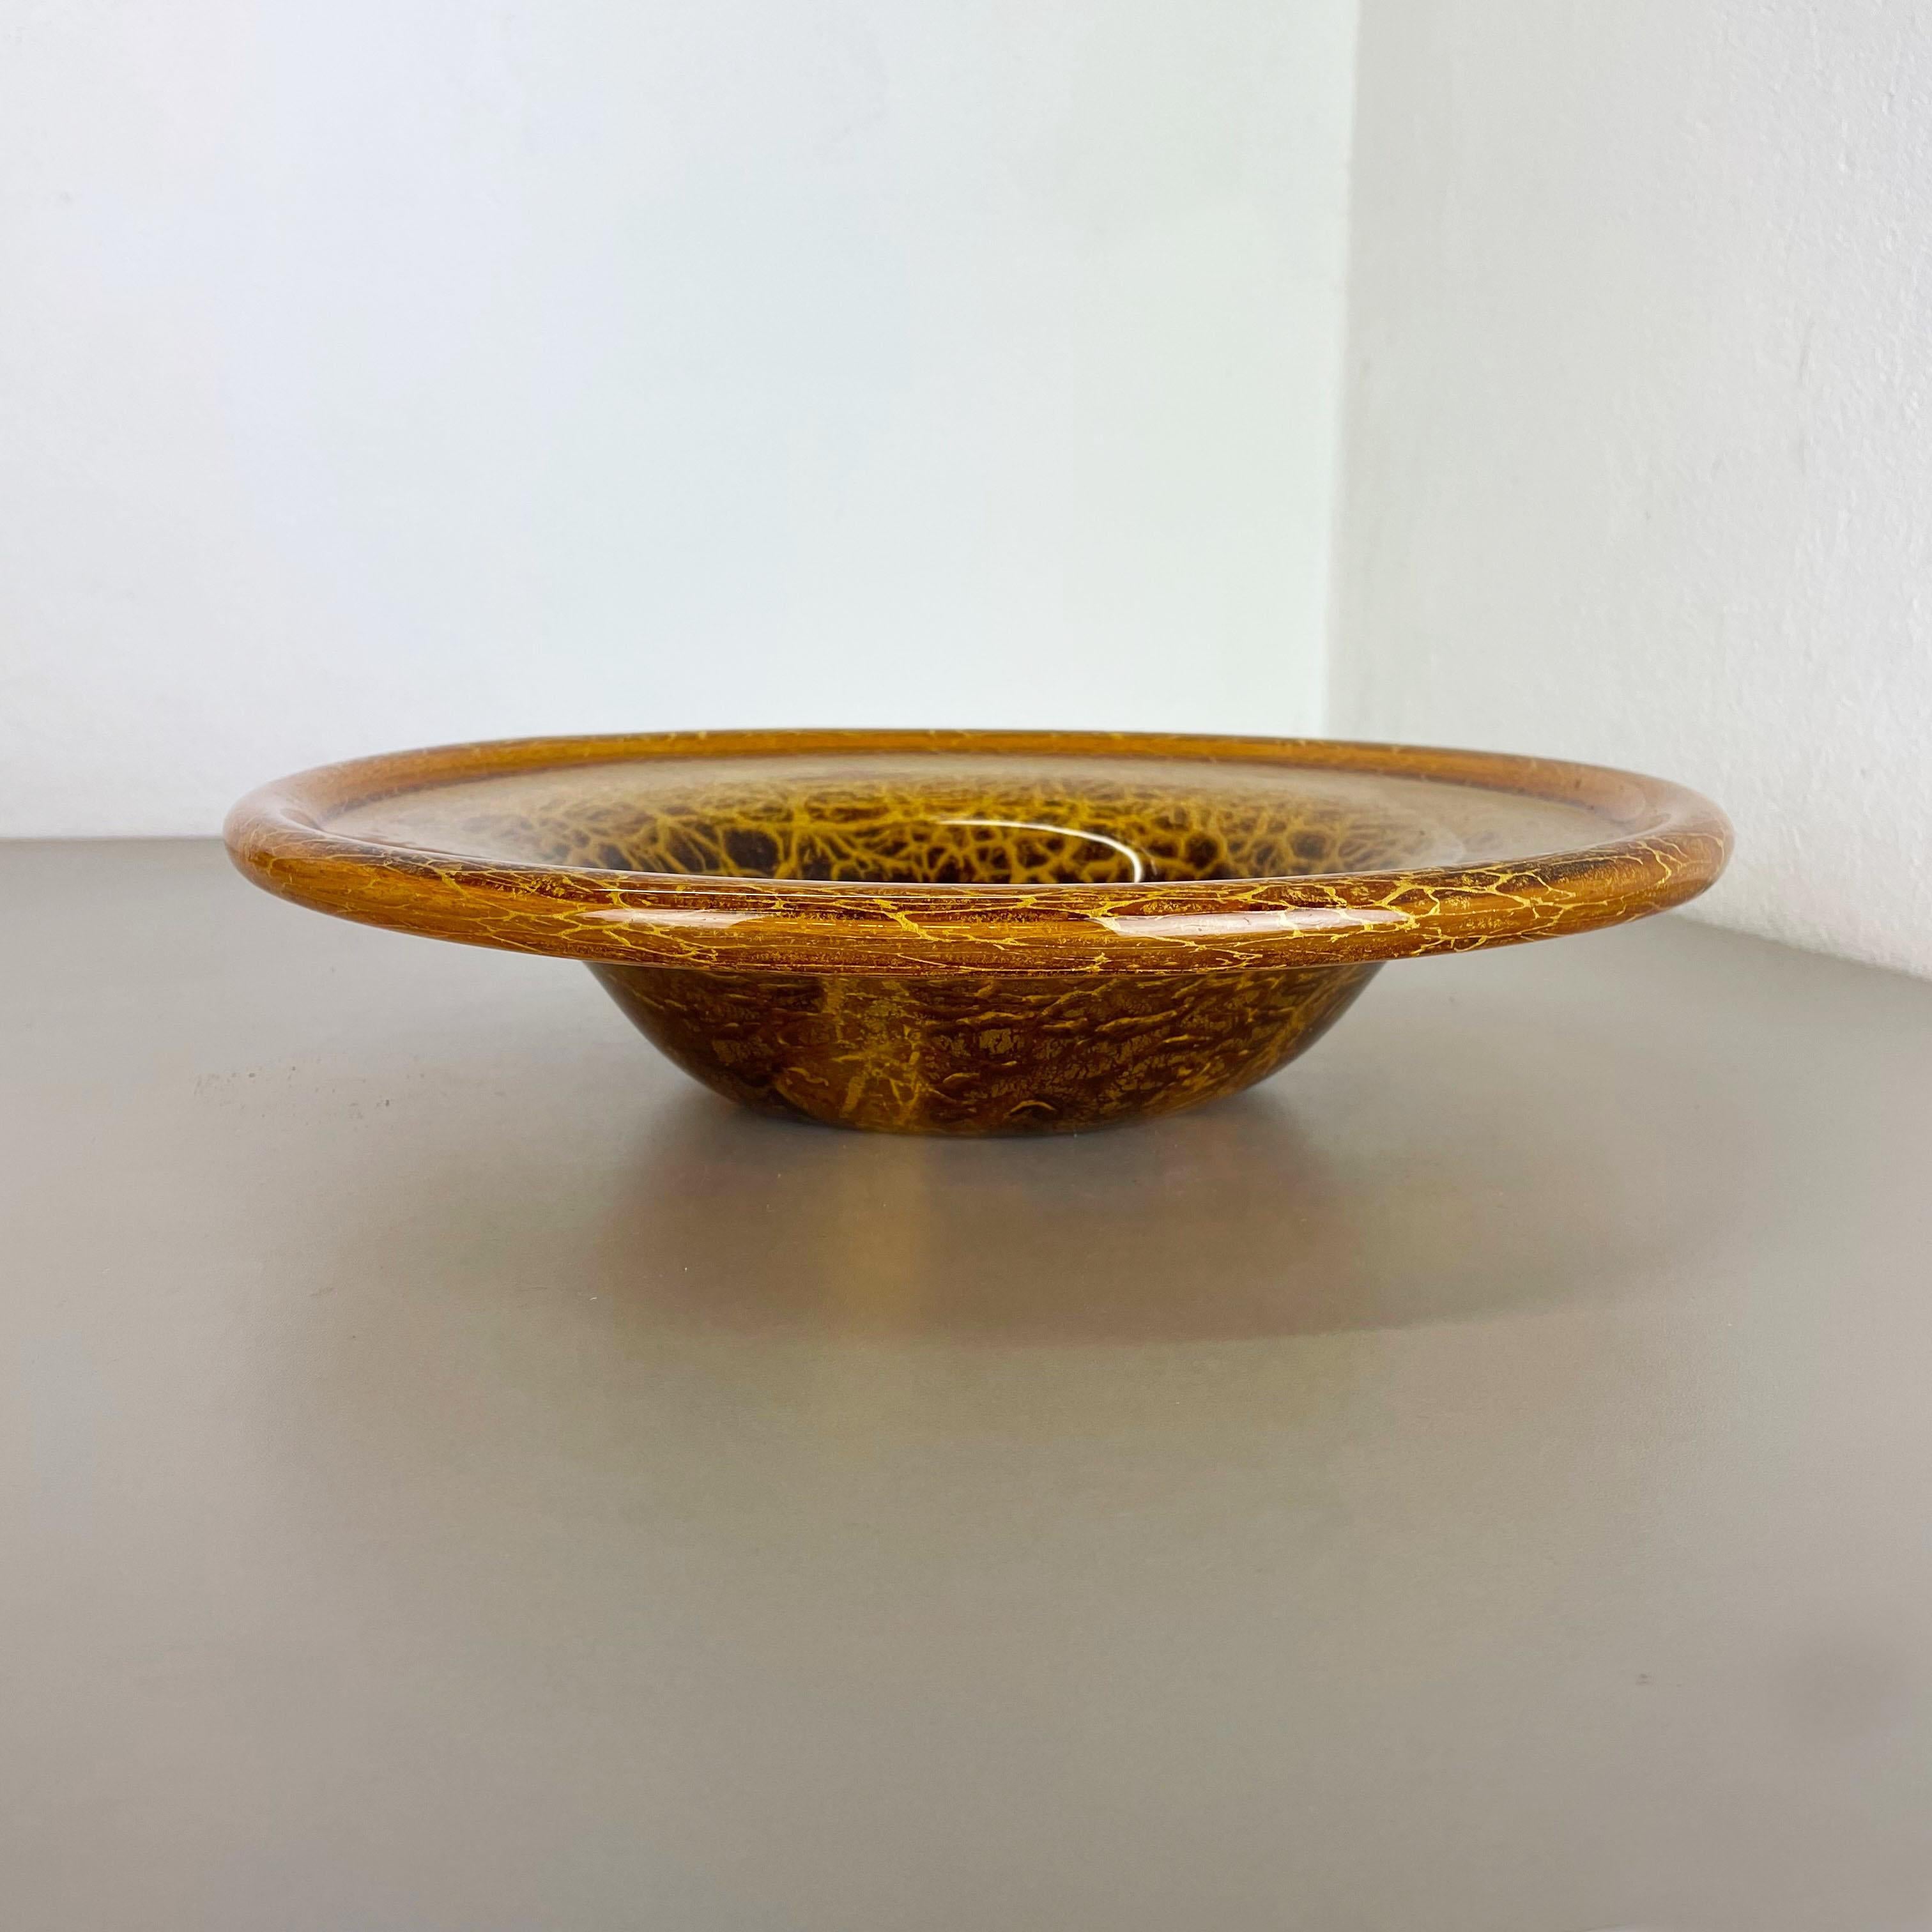 German Glass Bowl by Karl Wiedmann for WMF Ikora, 1930s Baushaus Art Deco In Good Condition For Sale In Kirchlengern, DE